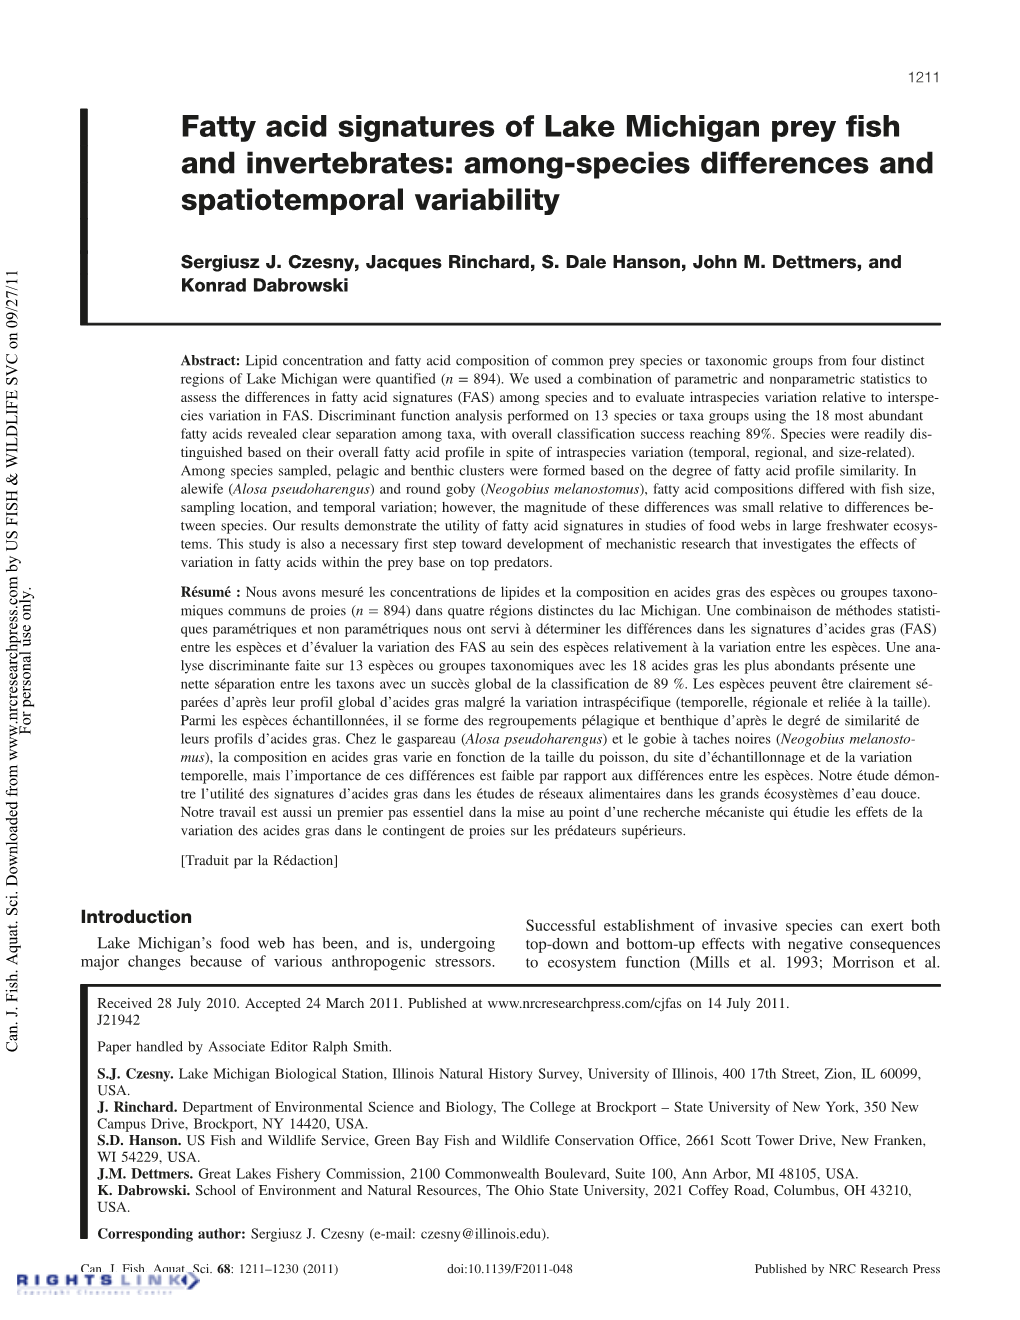 Fatty Acid Signatures of Lake Michigan Prey Fish and Invertebrates: Among-Species Differences and Spatiotemporal Variability